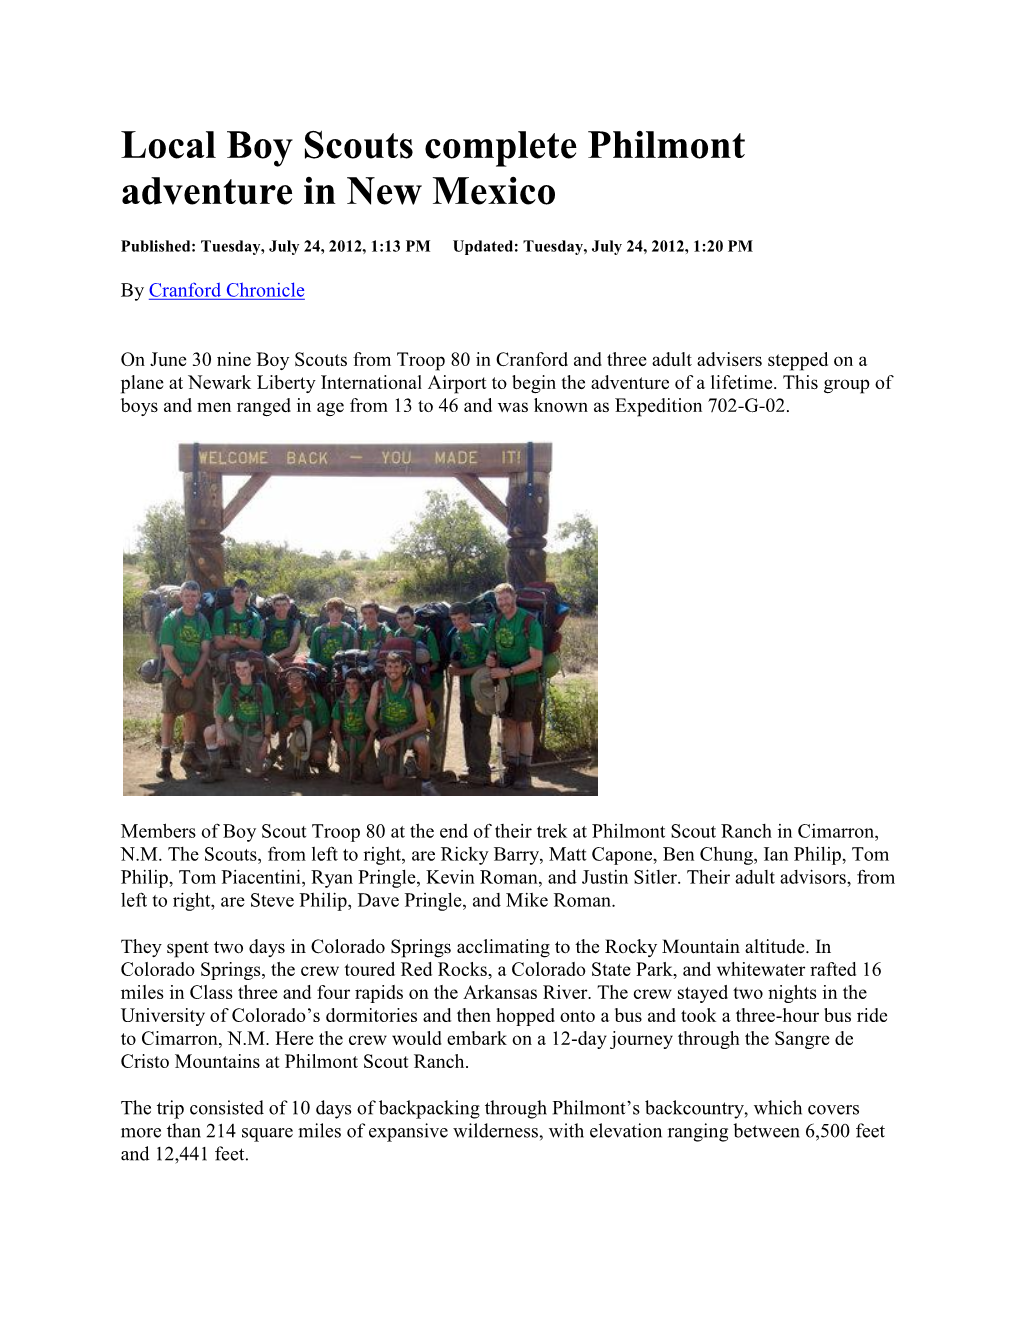 Local Boy Scouts Complete Philmont Adventure in New Mexico